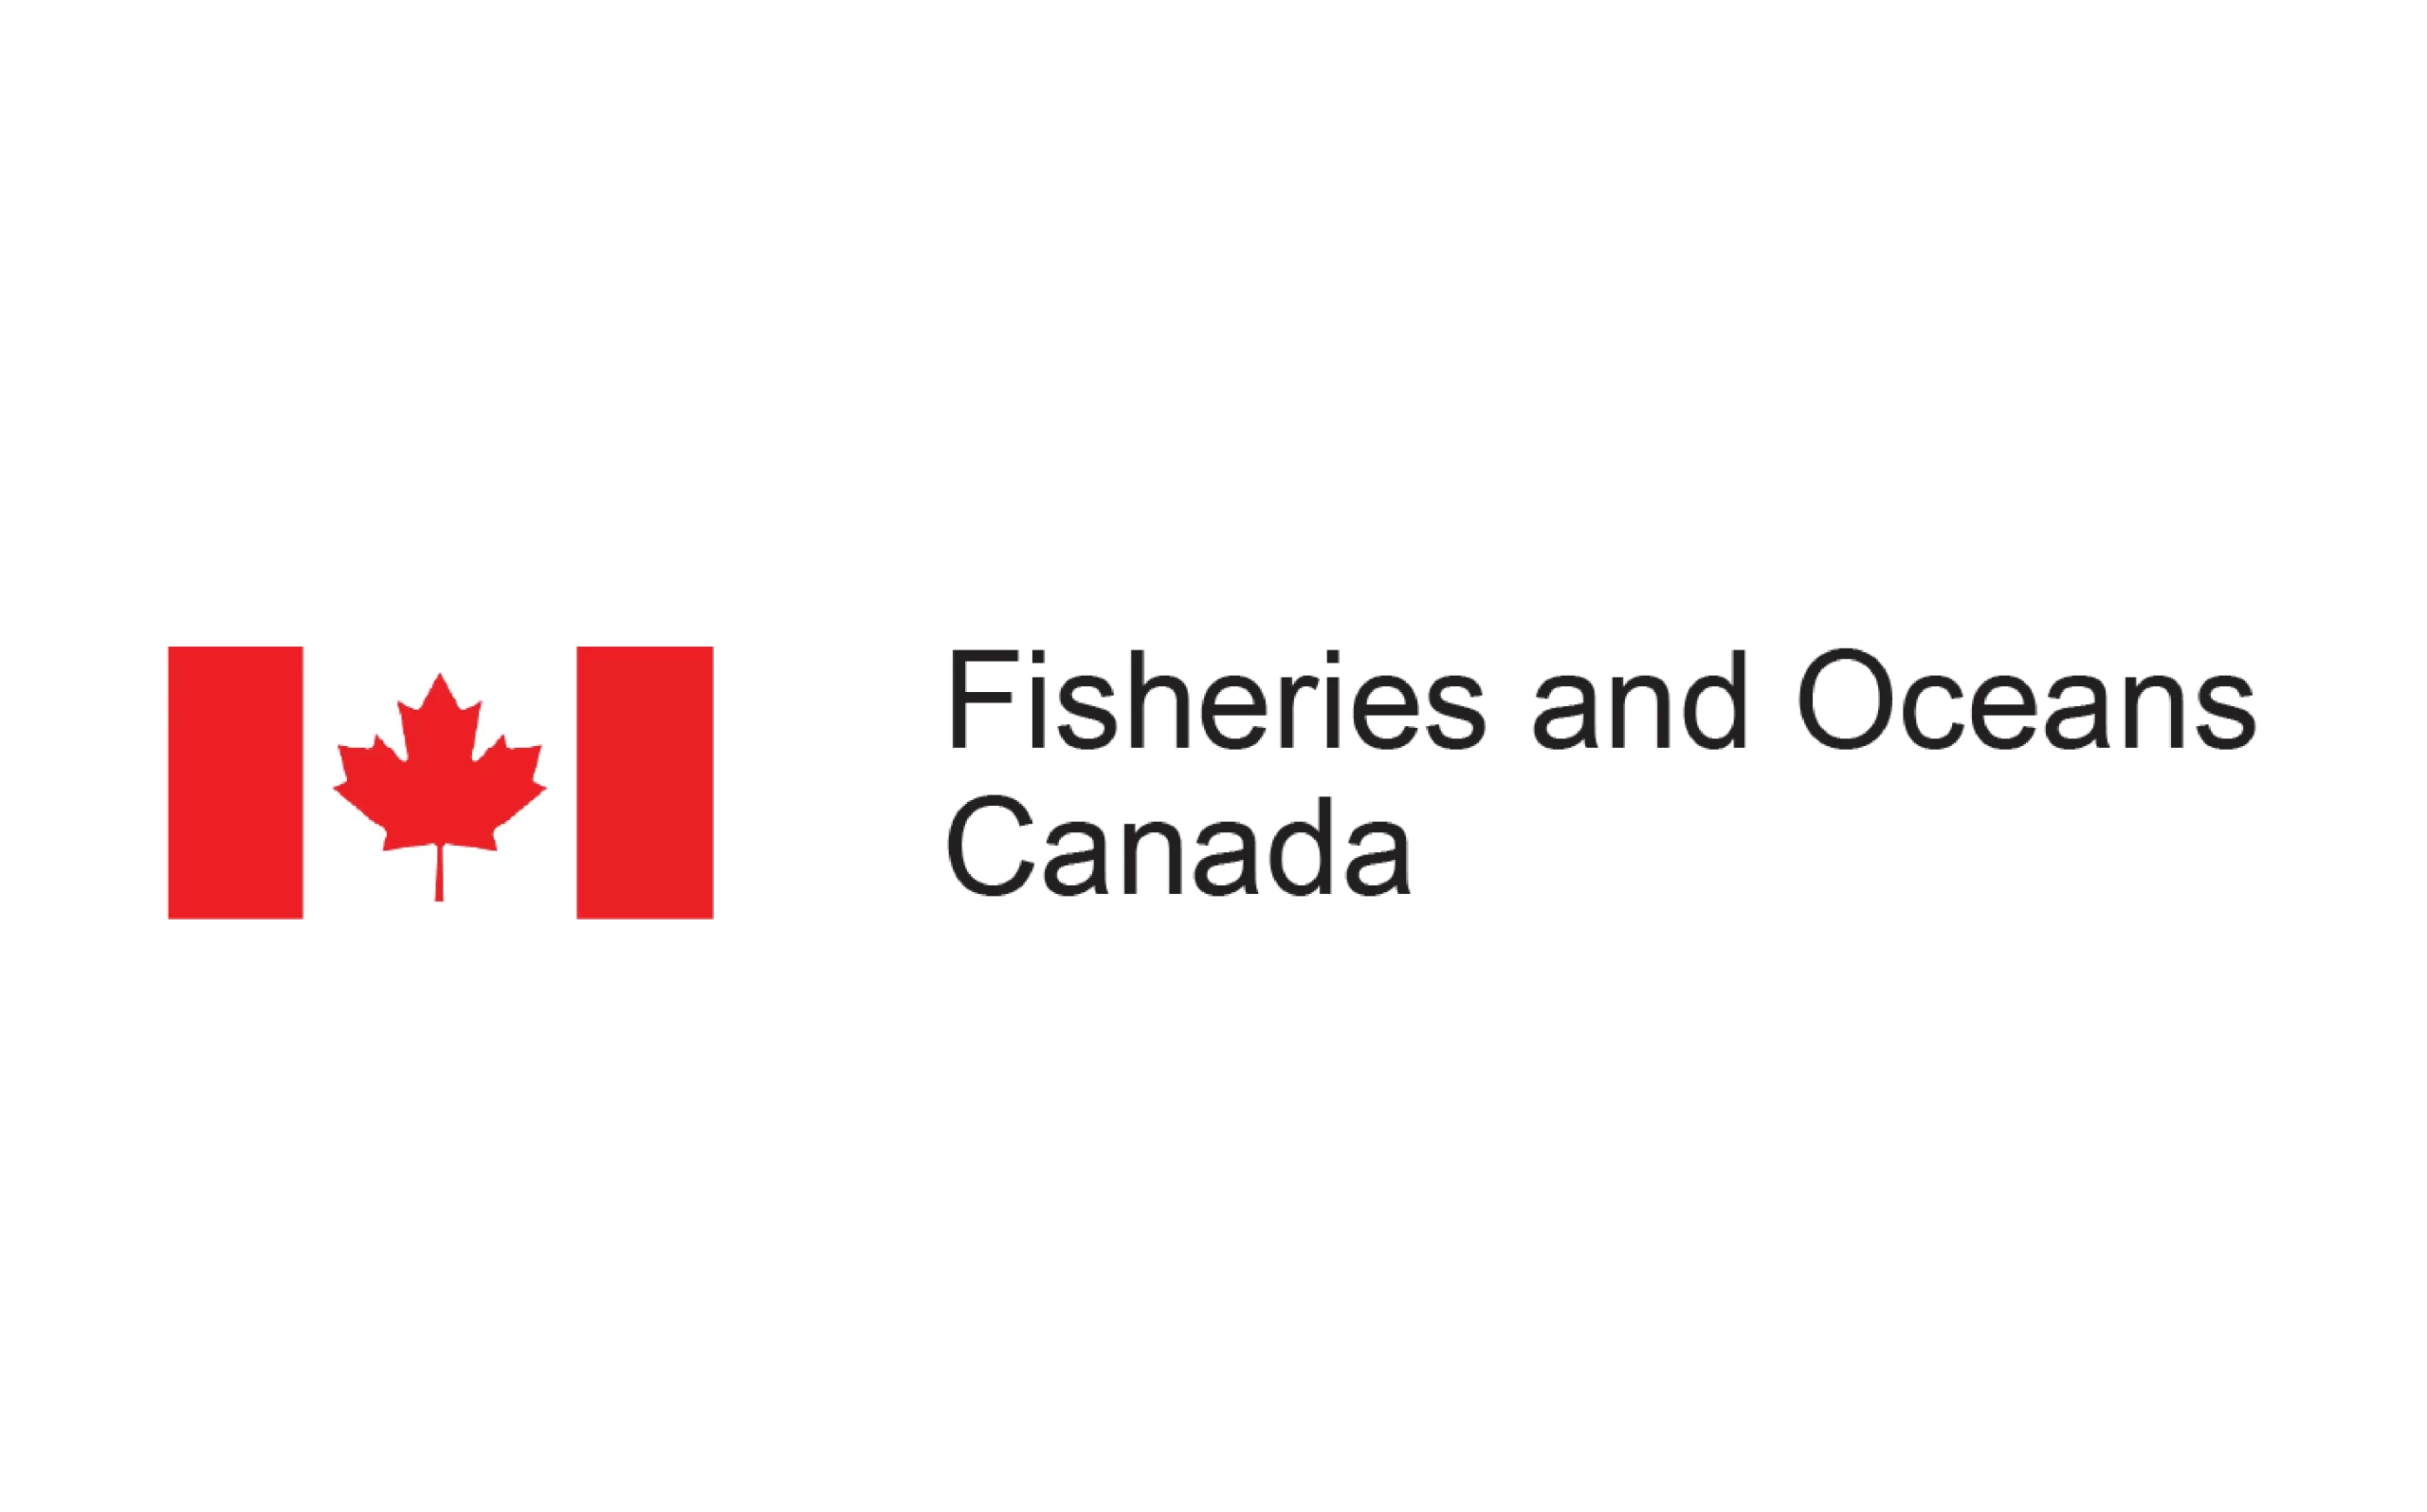 Red and white Fisheries and Oceans Canada logo